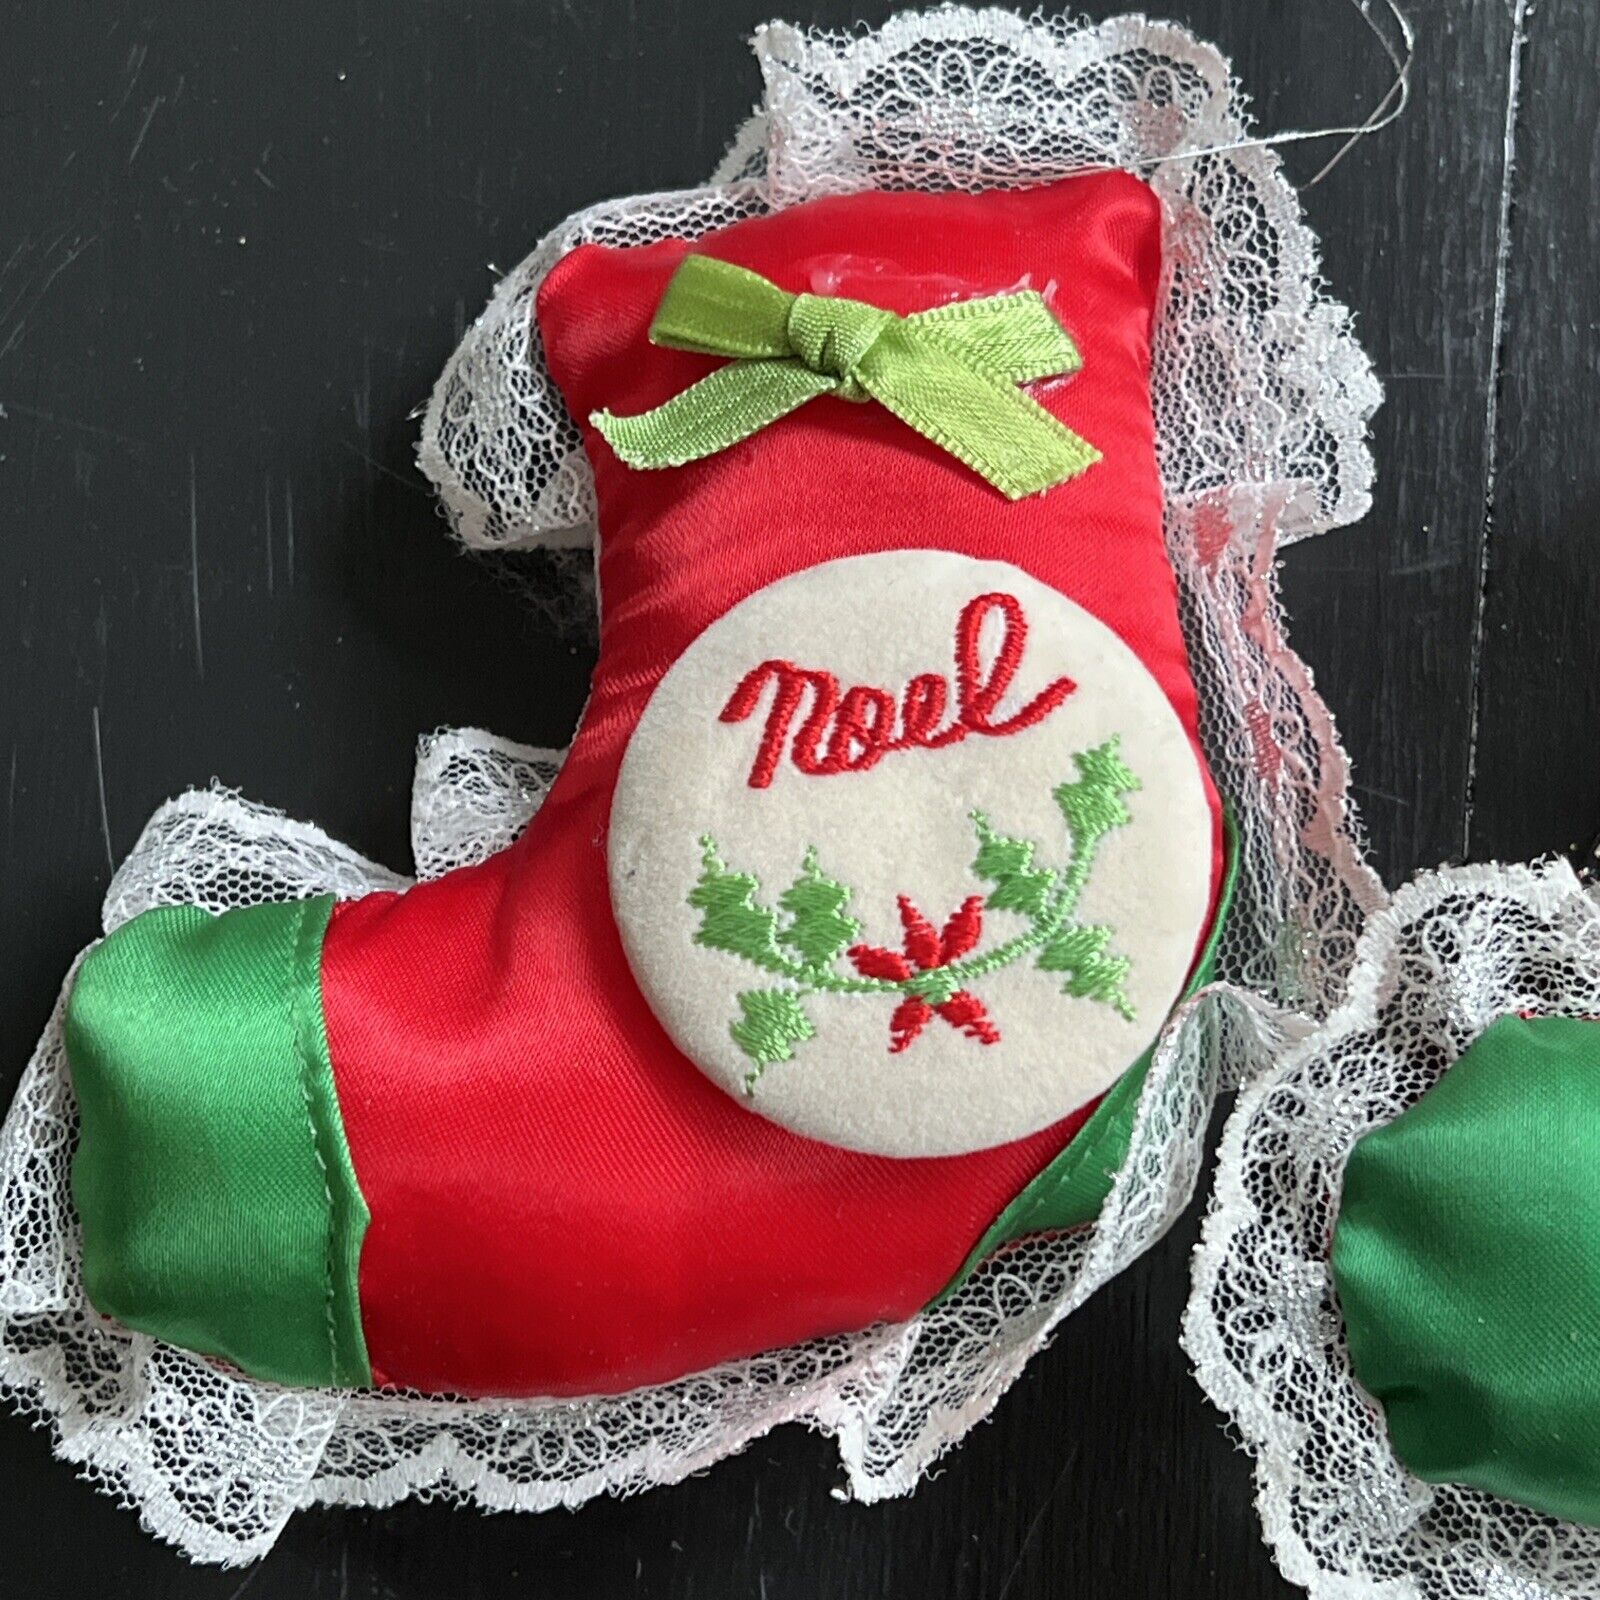 3 VINTAGE GIFTCO 4” SATIN EMBROIDERED NOEL PILLOW ORNAMENTS